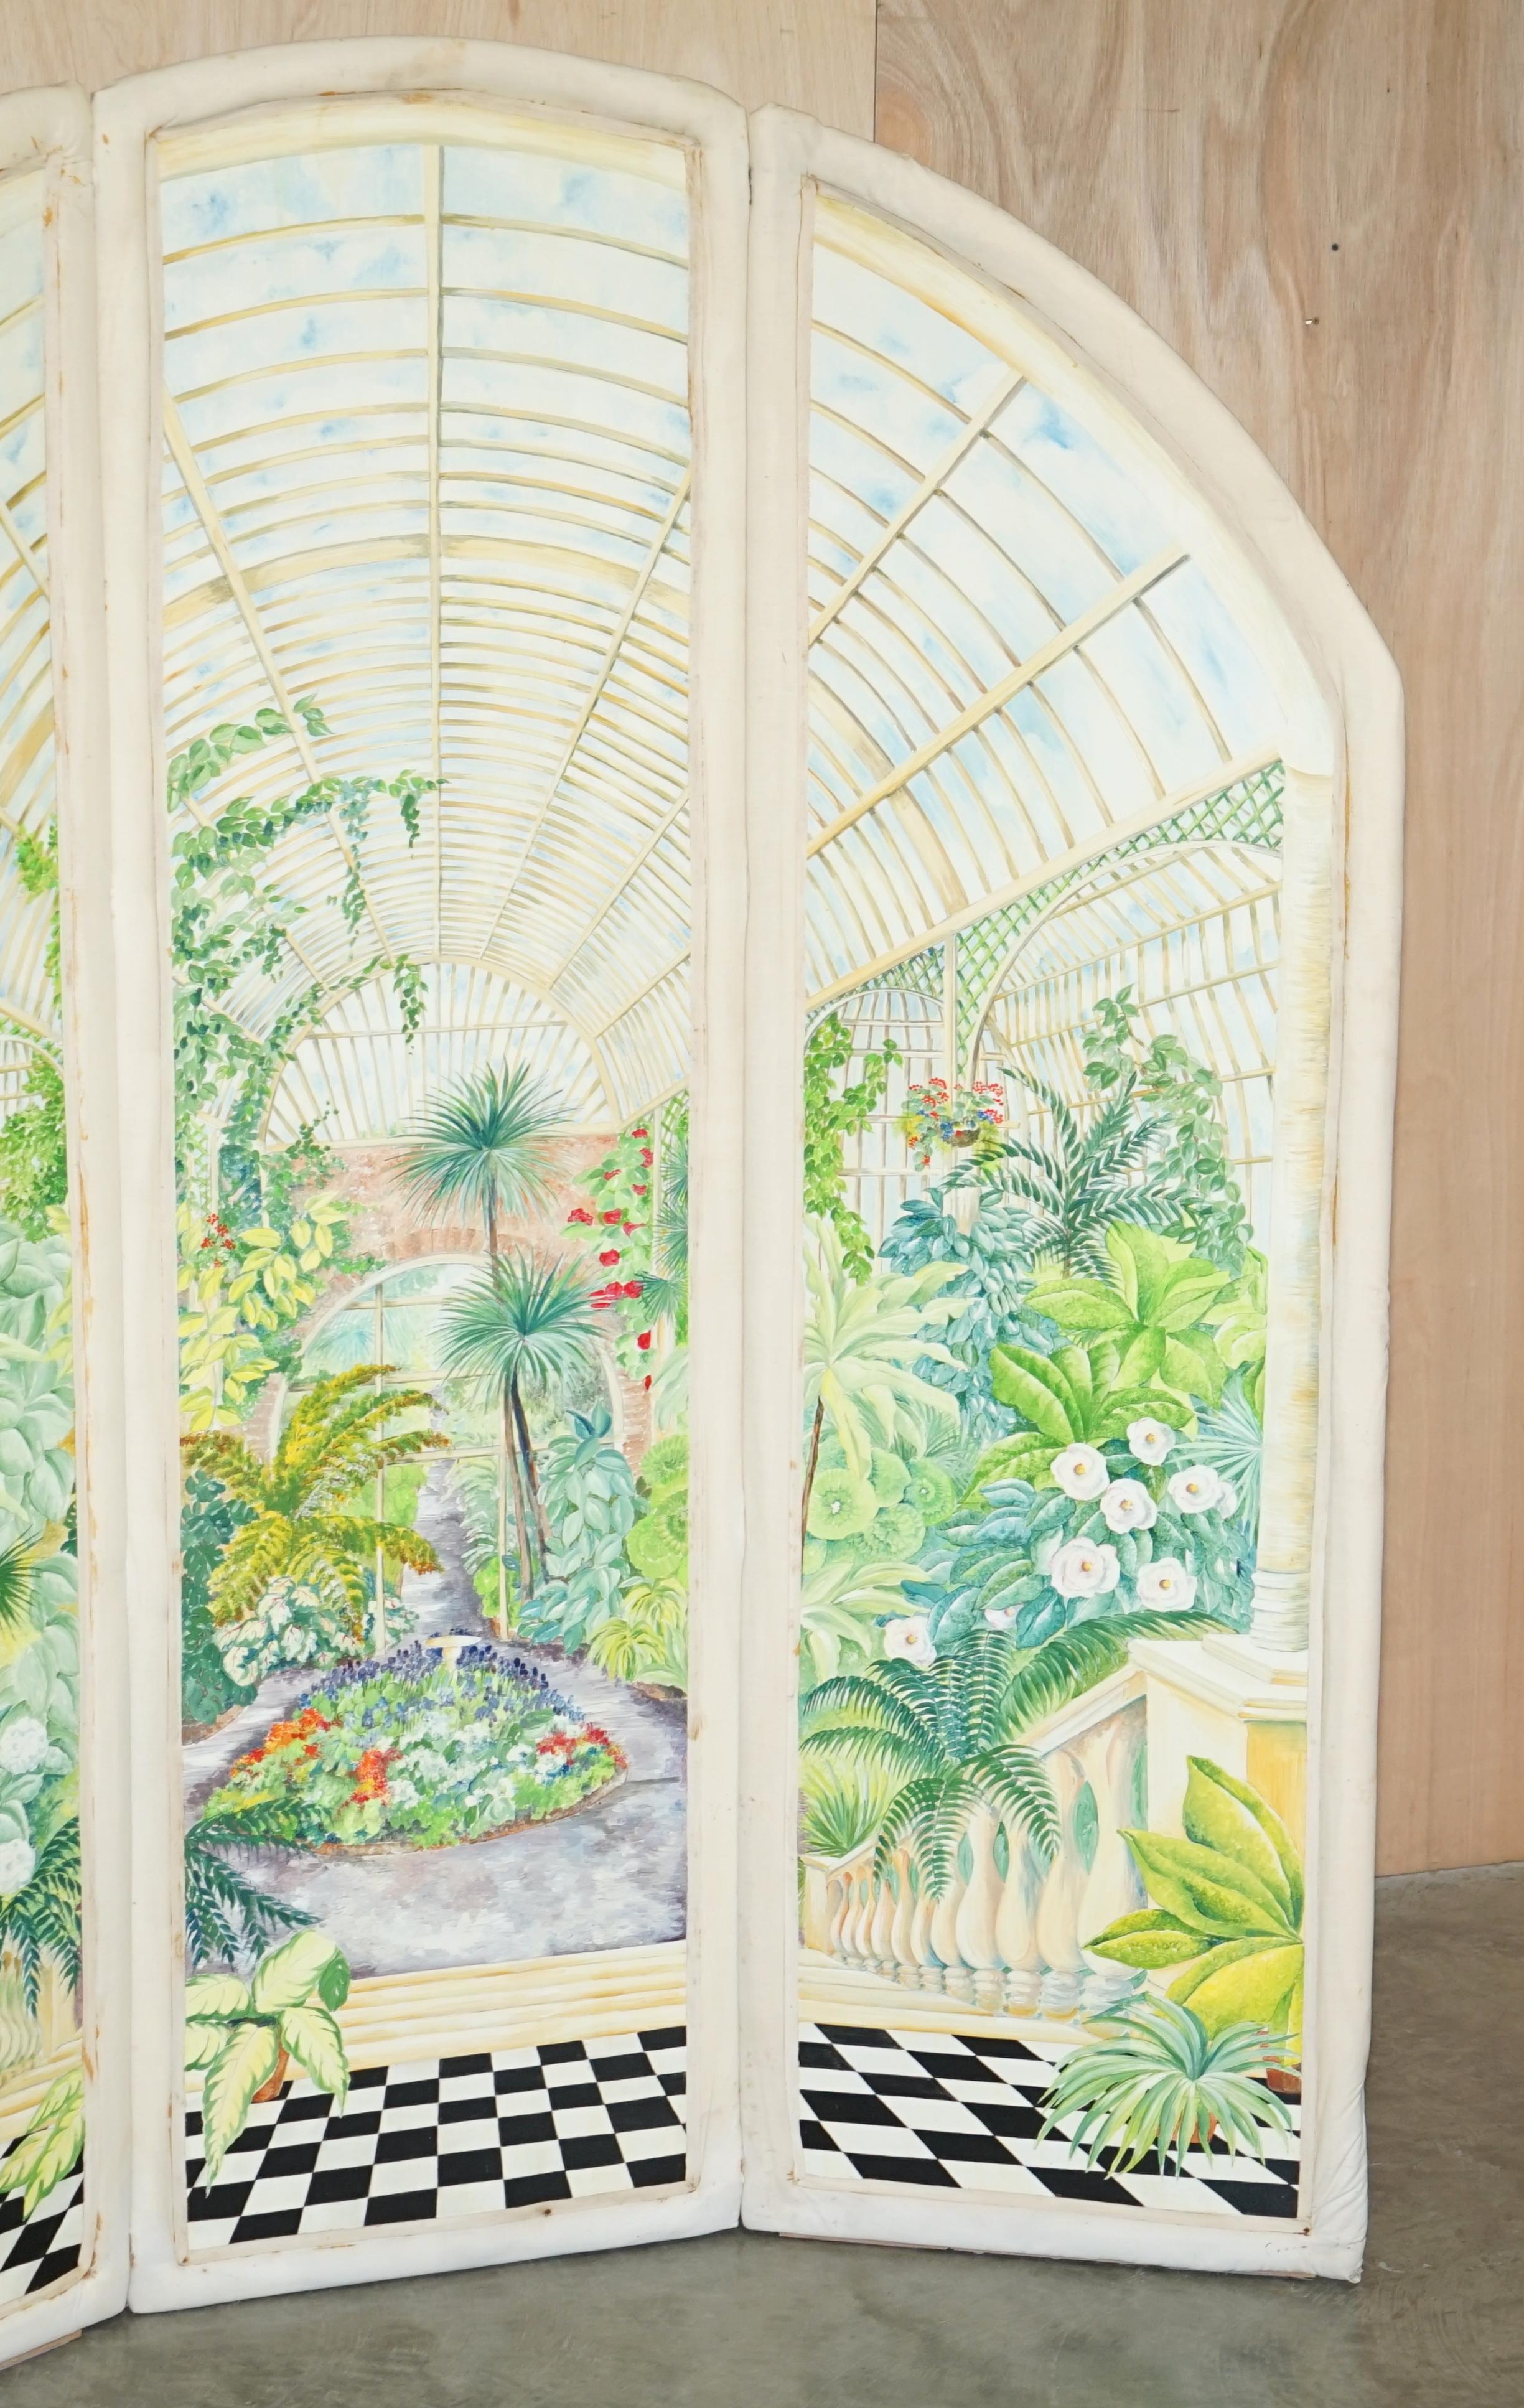 STUNNING VERY LARGE 1930's WATERCOLOR ROOM DIVIDER FOLDING SCREEN GARDEN SCENE For Sale 4